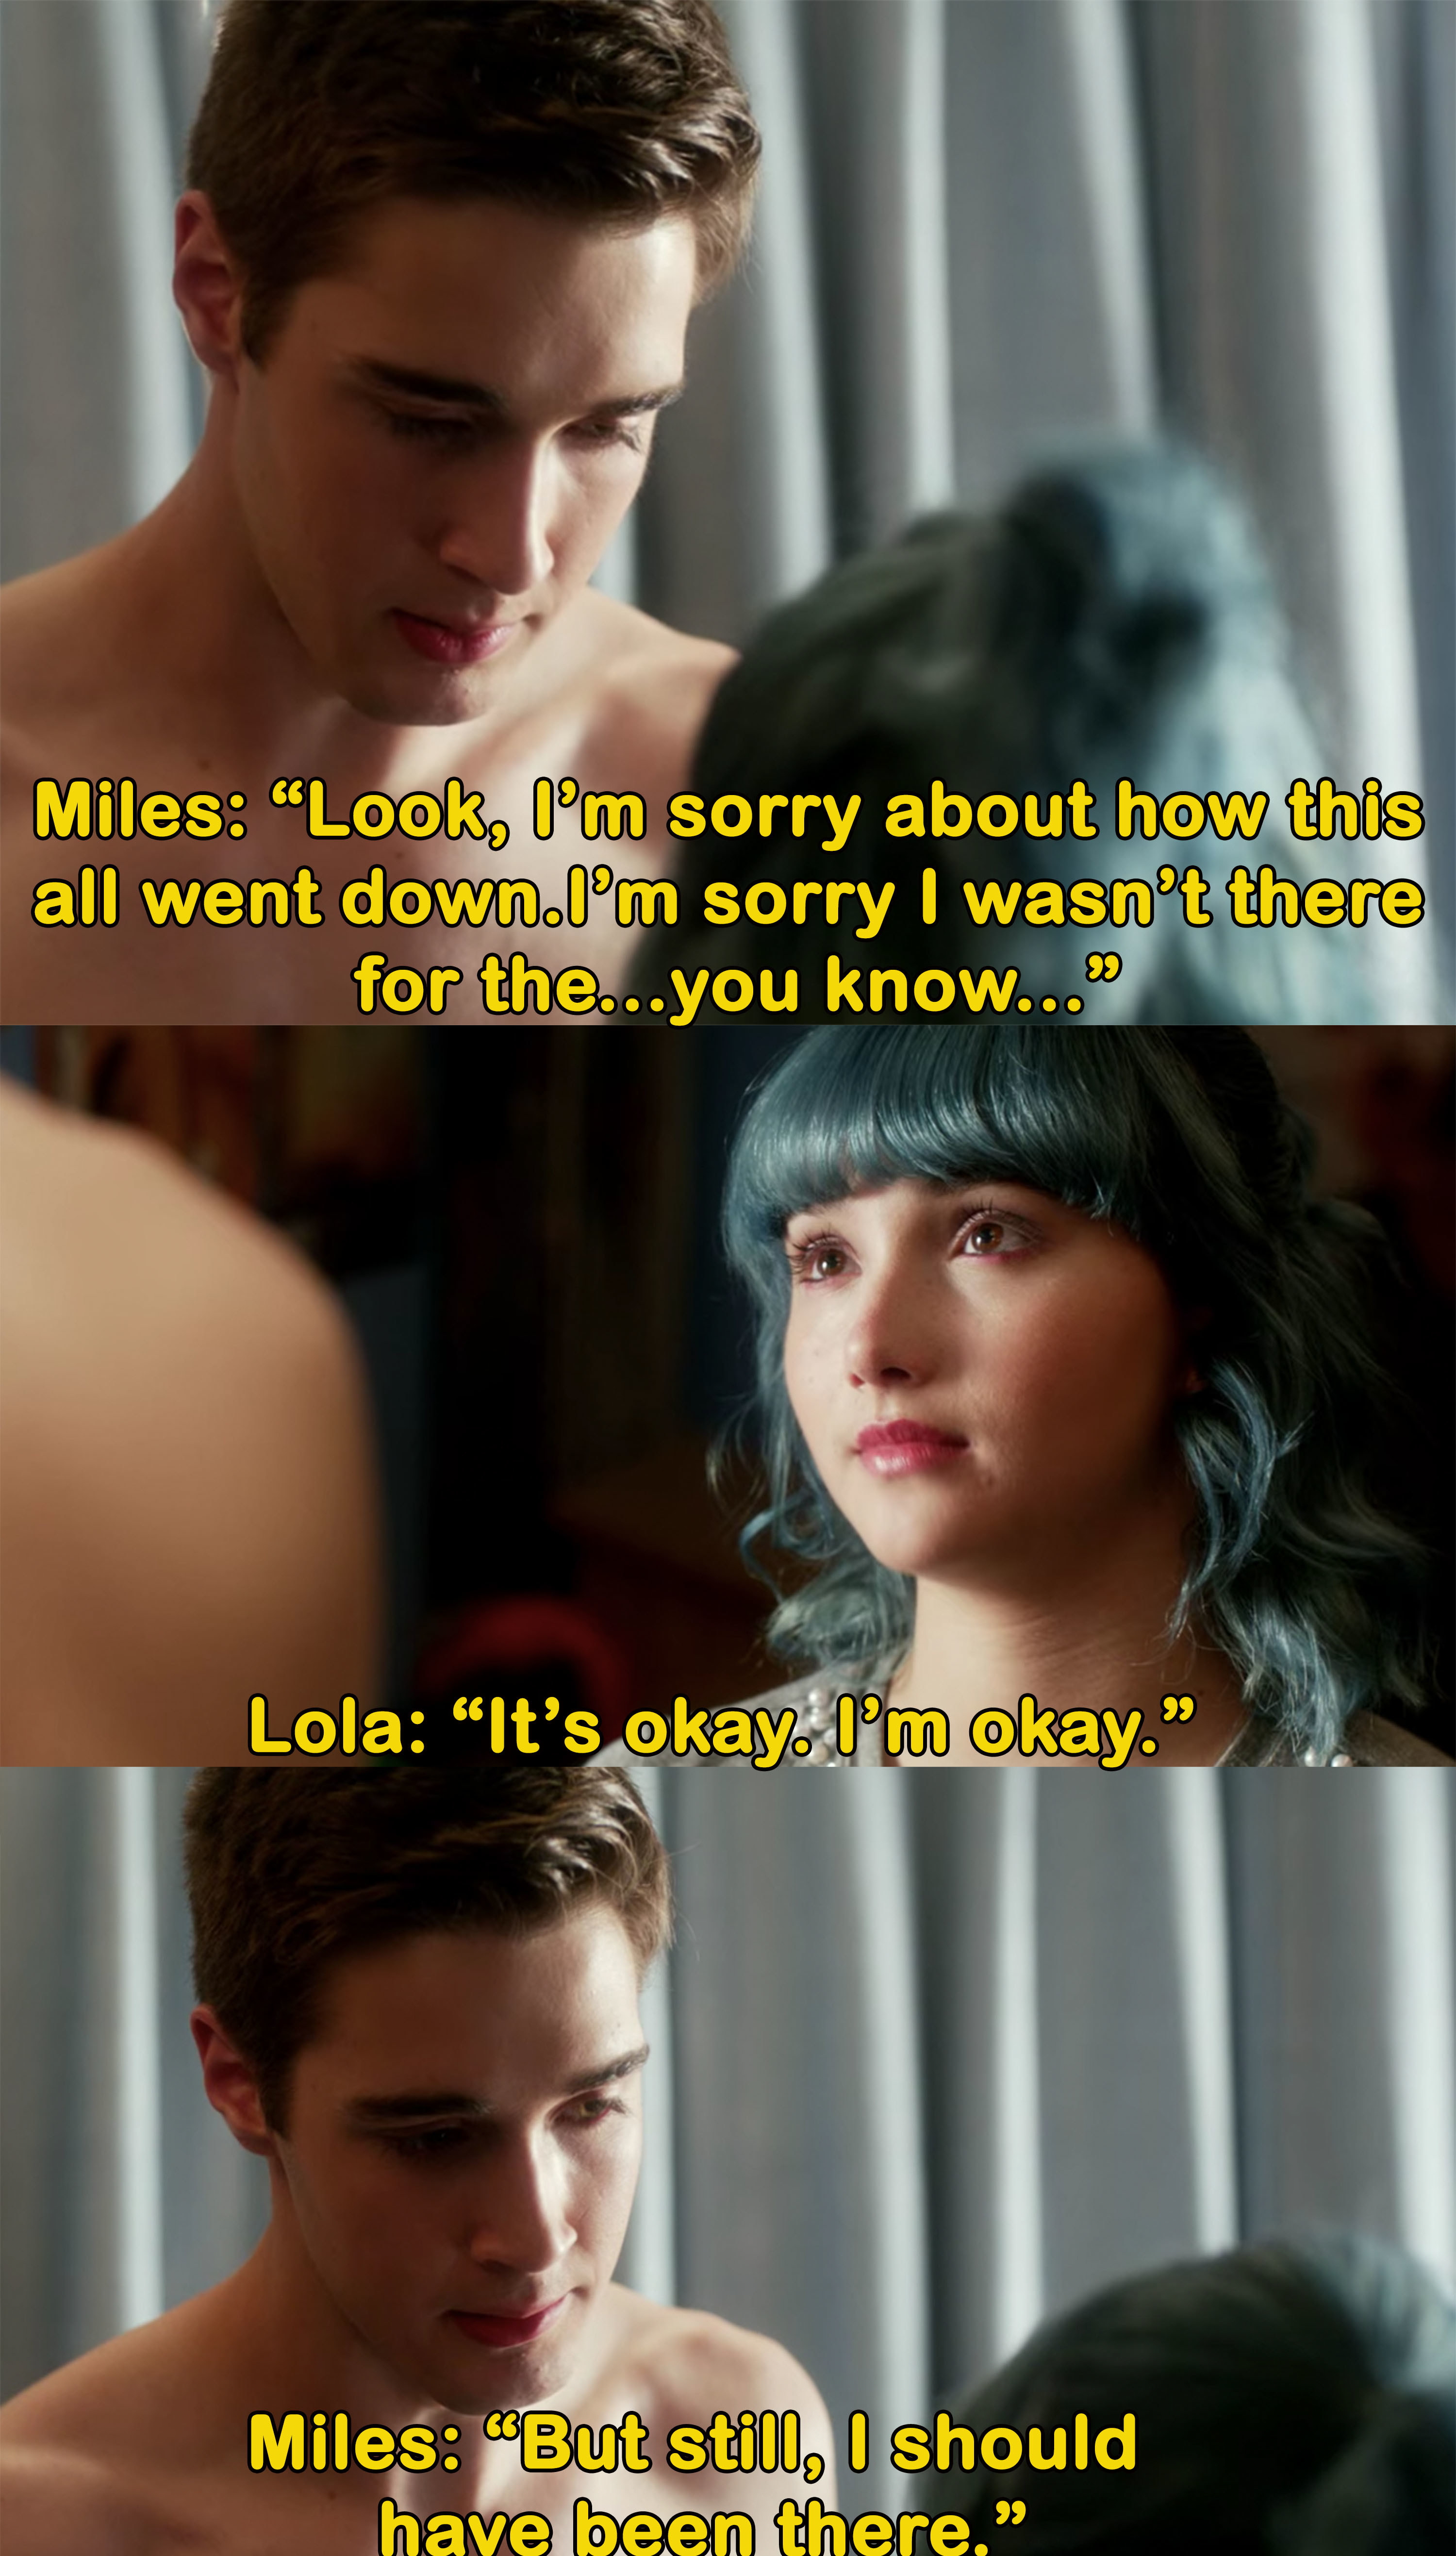 Miles says he should have been there for Lola